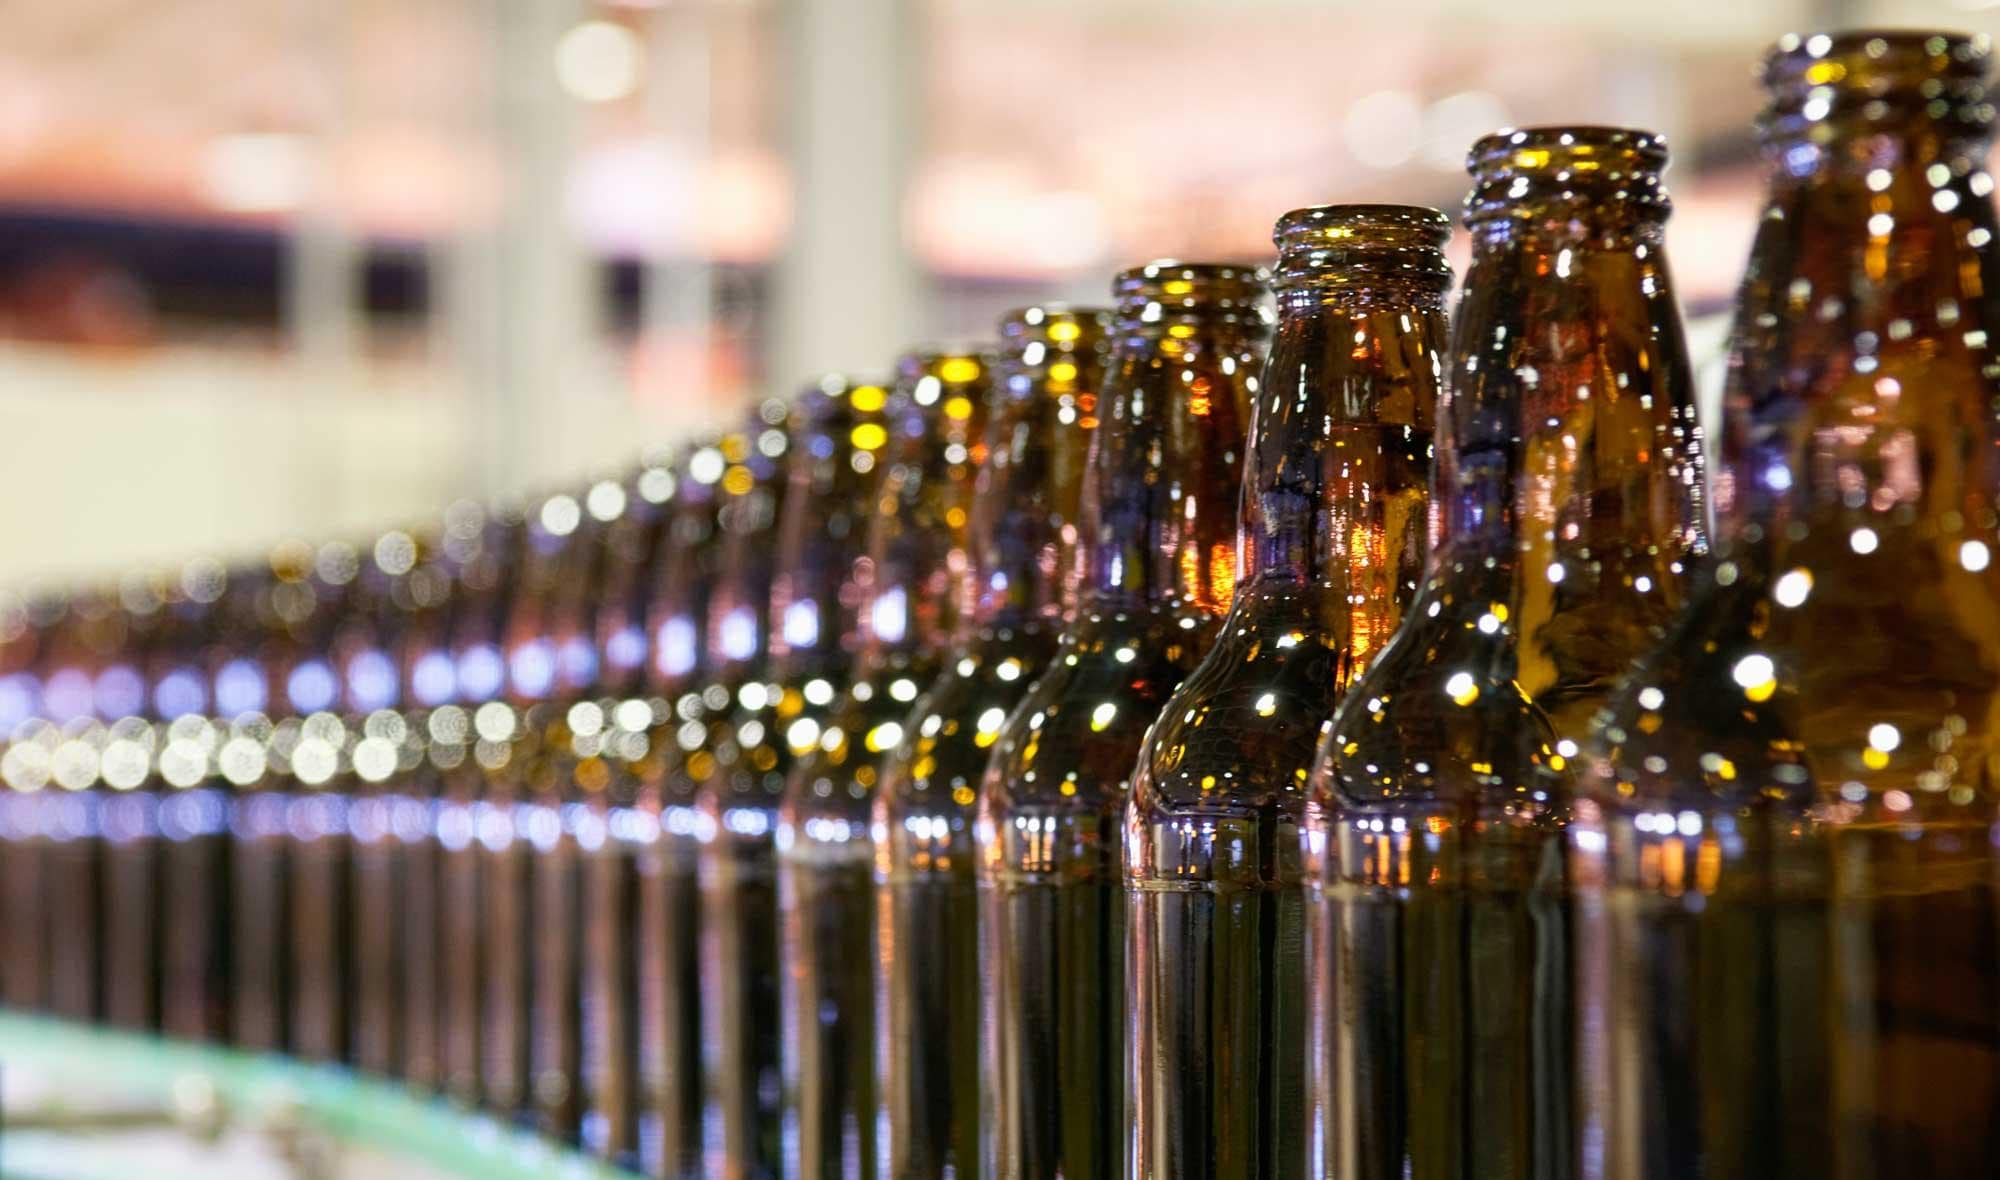 99 bottles of beer in the production line